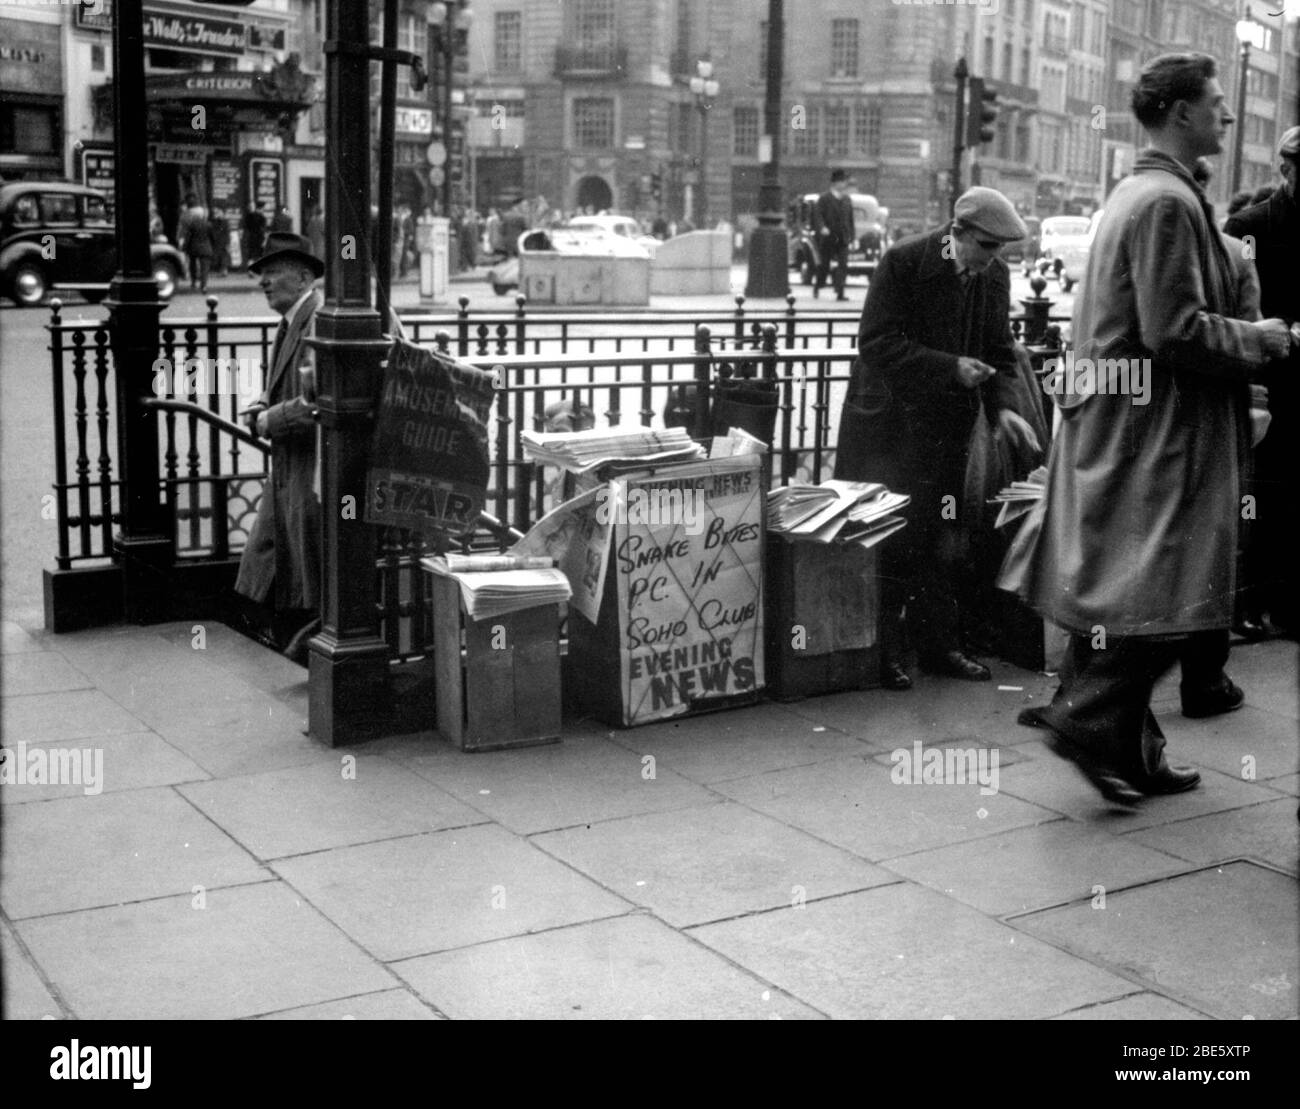 A man sells newspapers to London commuters at his newsstand in Piccadilly Circus, London in the 1930s. The headline in the Evening News is Snake Bites PC in Soho Club. Stock Photo